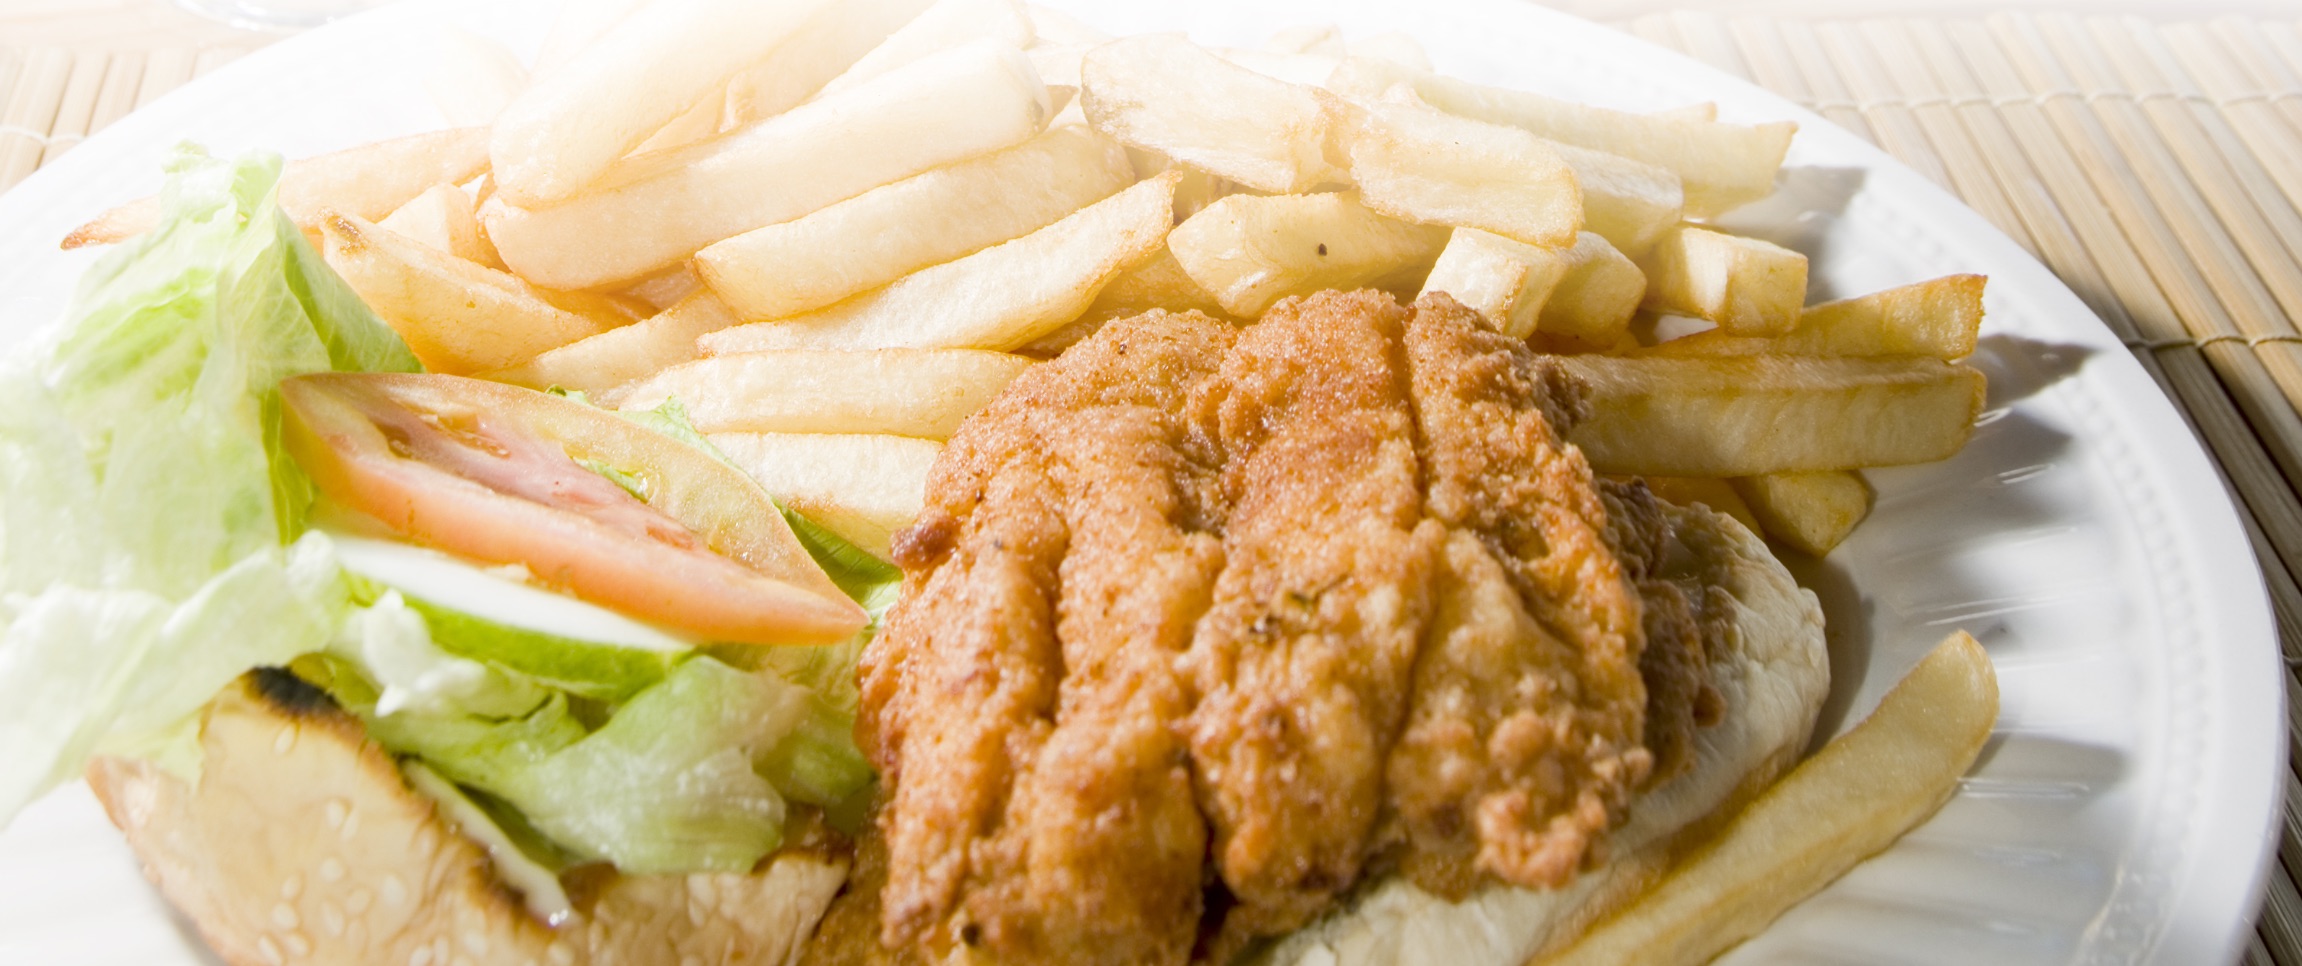 Fried Fish and French Fry Sandwich